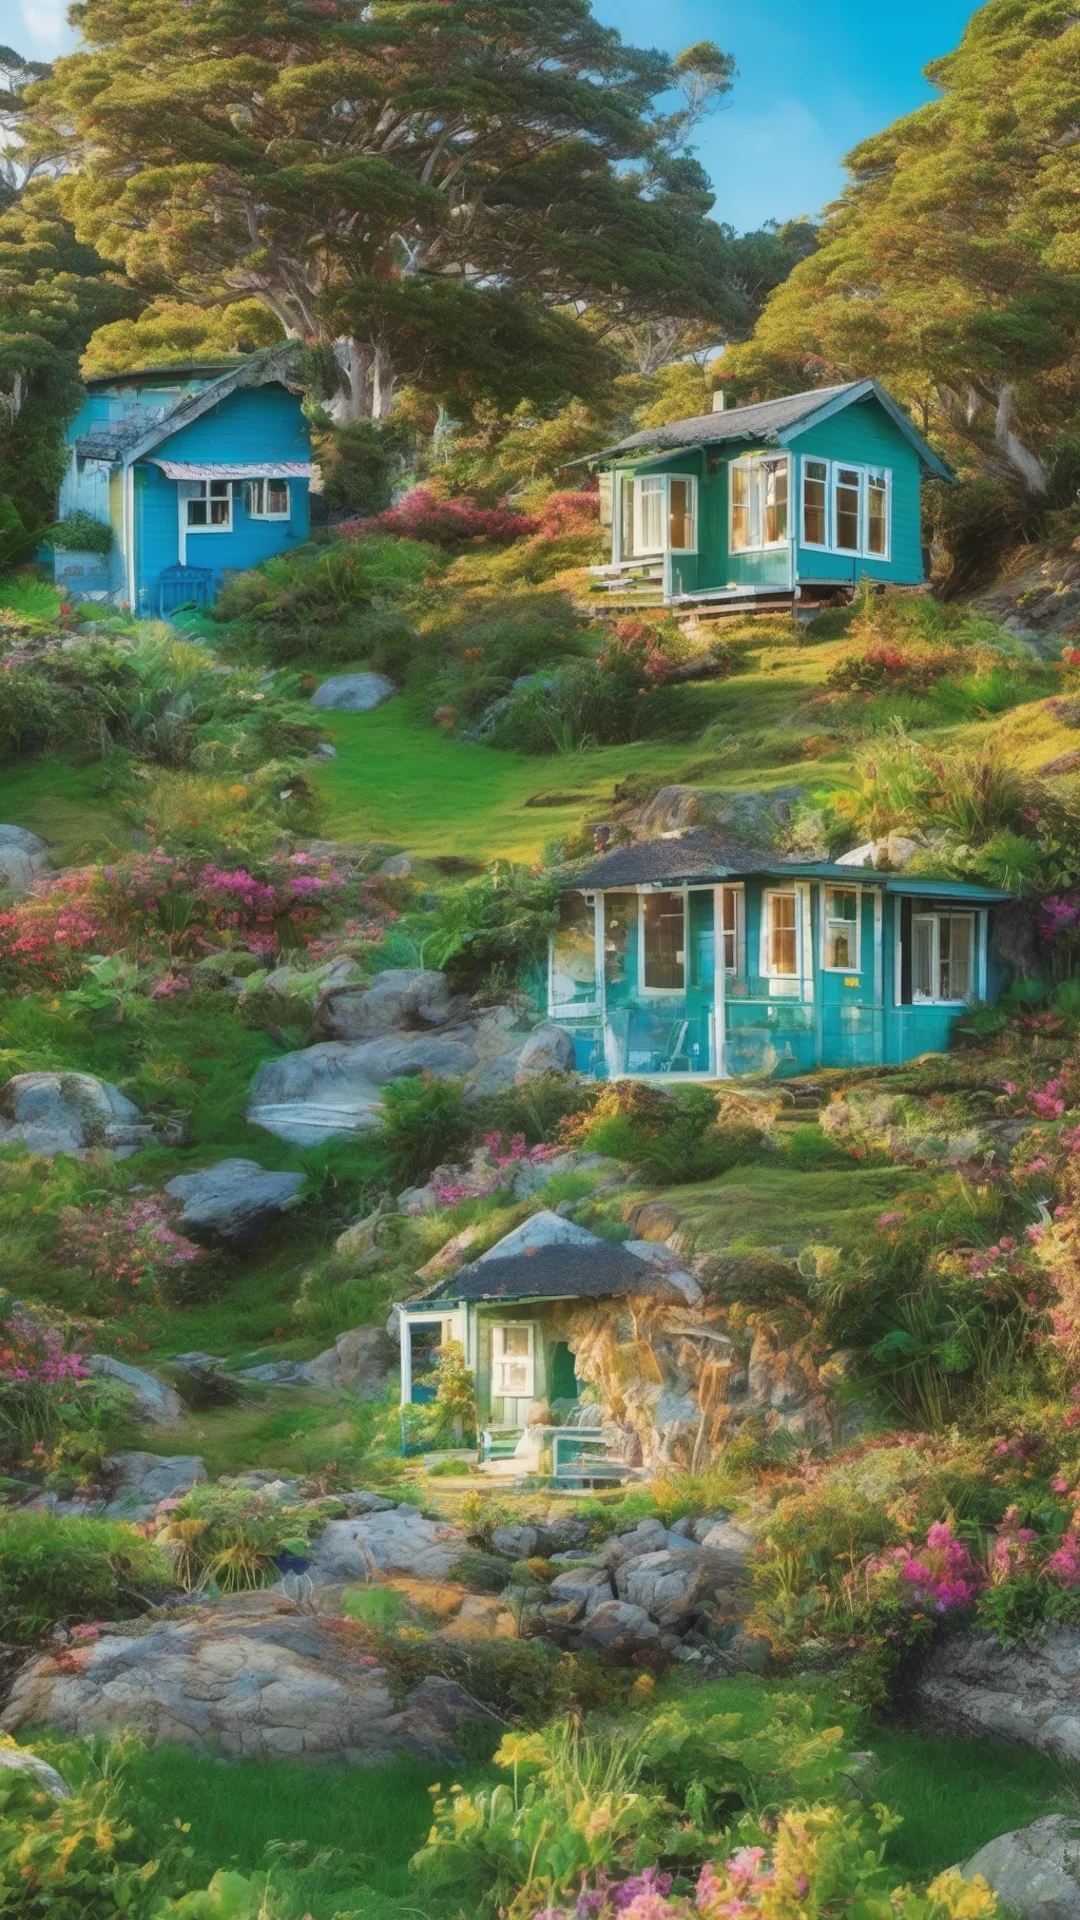 aipicturesque landscape  beautiful colorful tones bay of islands grace stunning cottage with colorful green and blue earth like planet rising tall